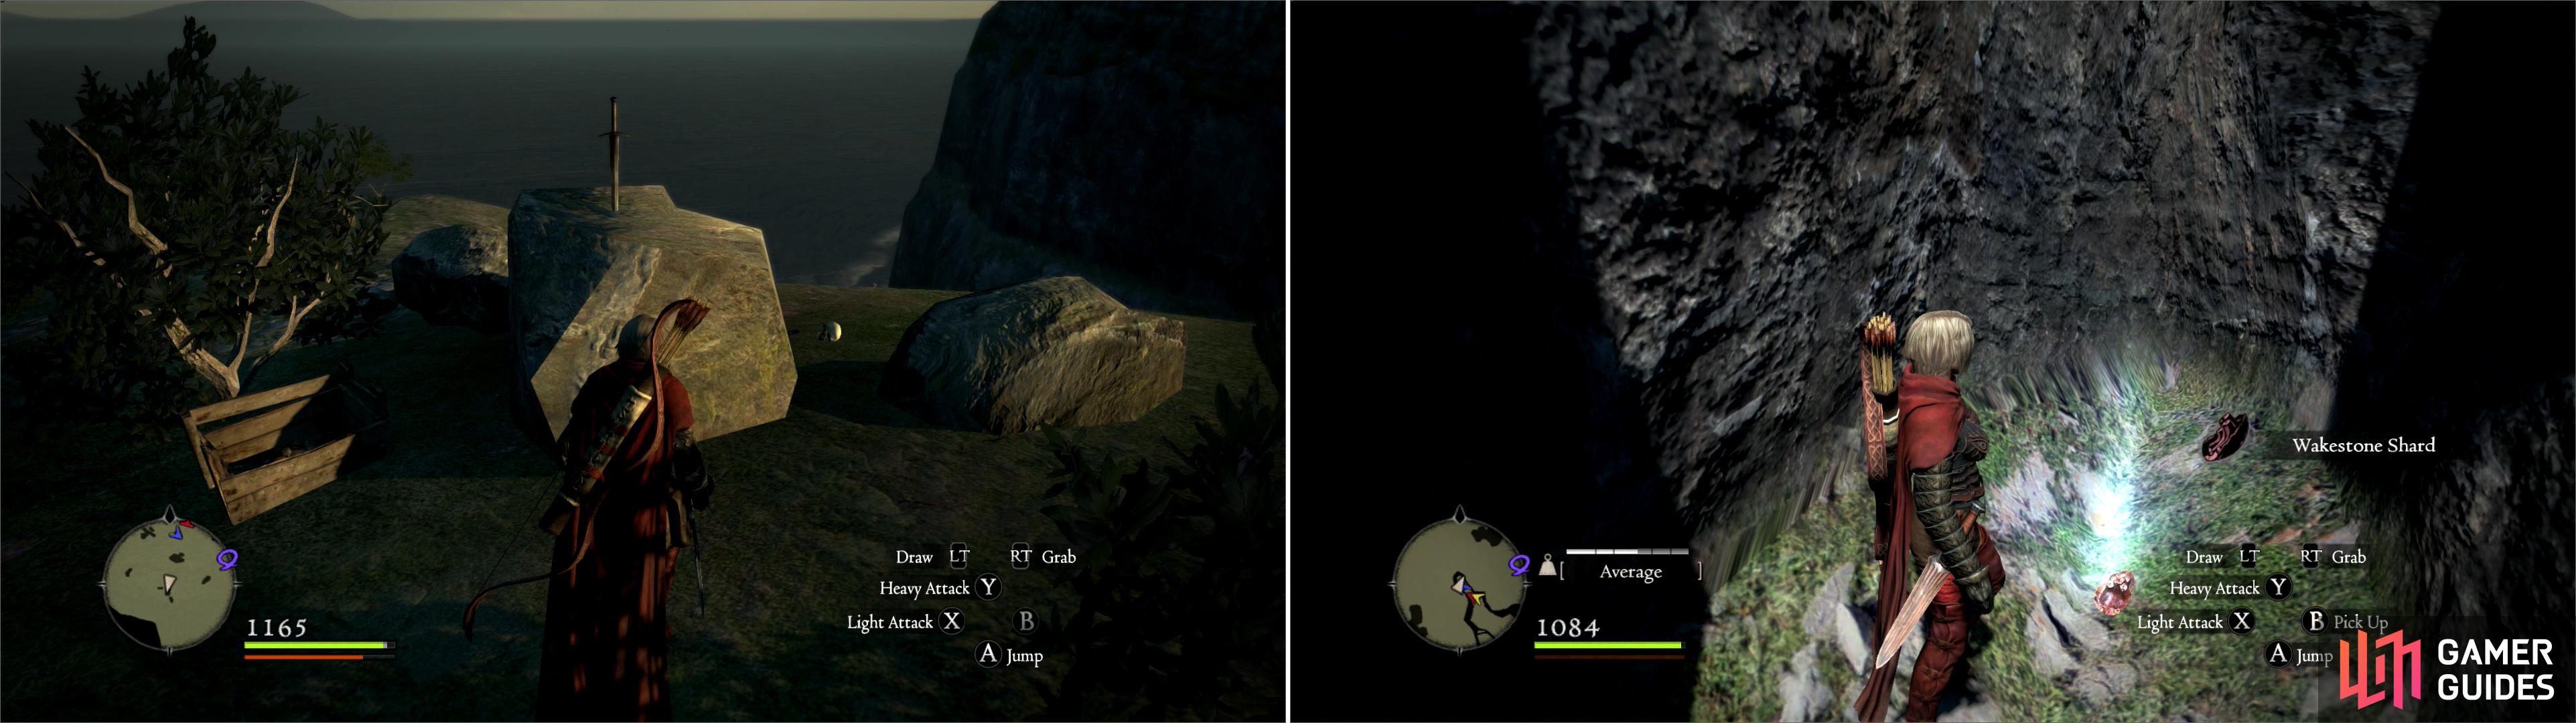 The cliche sword-in-the-stone can be searched for a random weapon (left). In a nearby chasm you can find a Wakestone Shard (right).